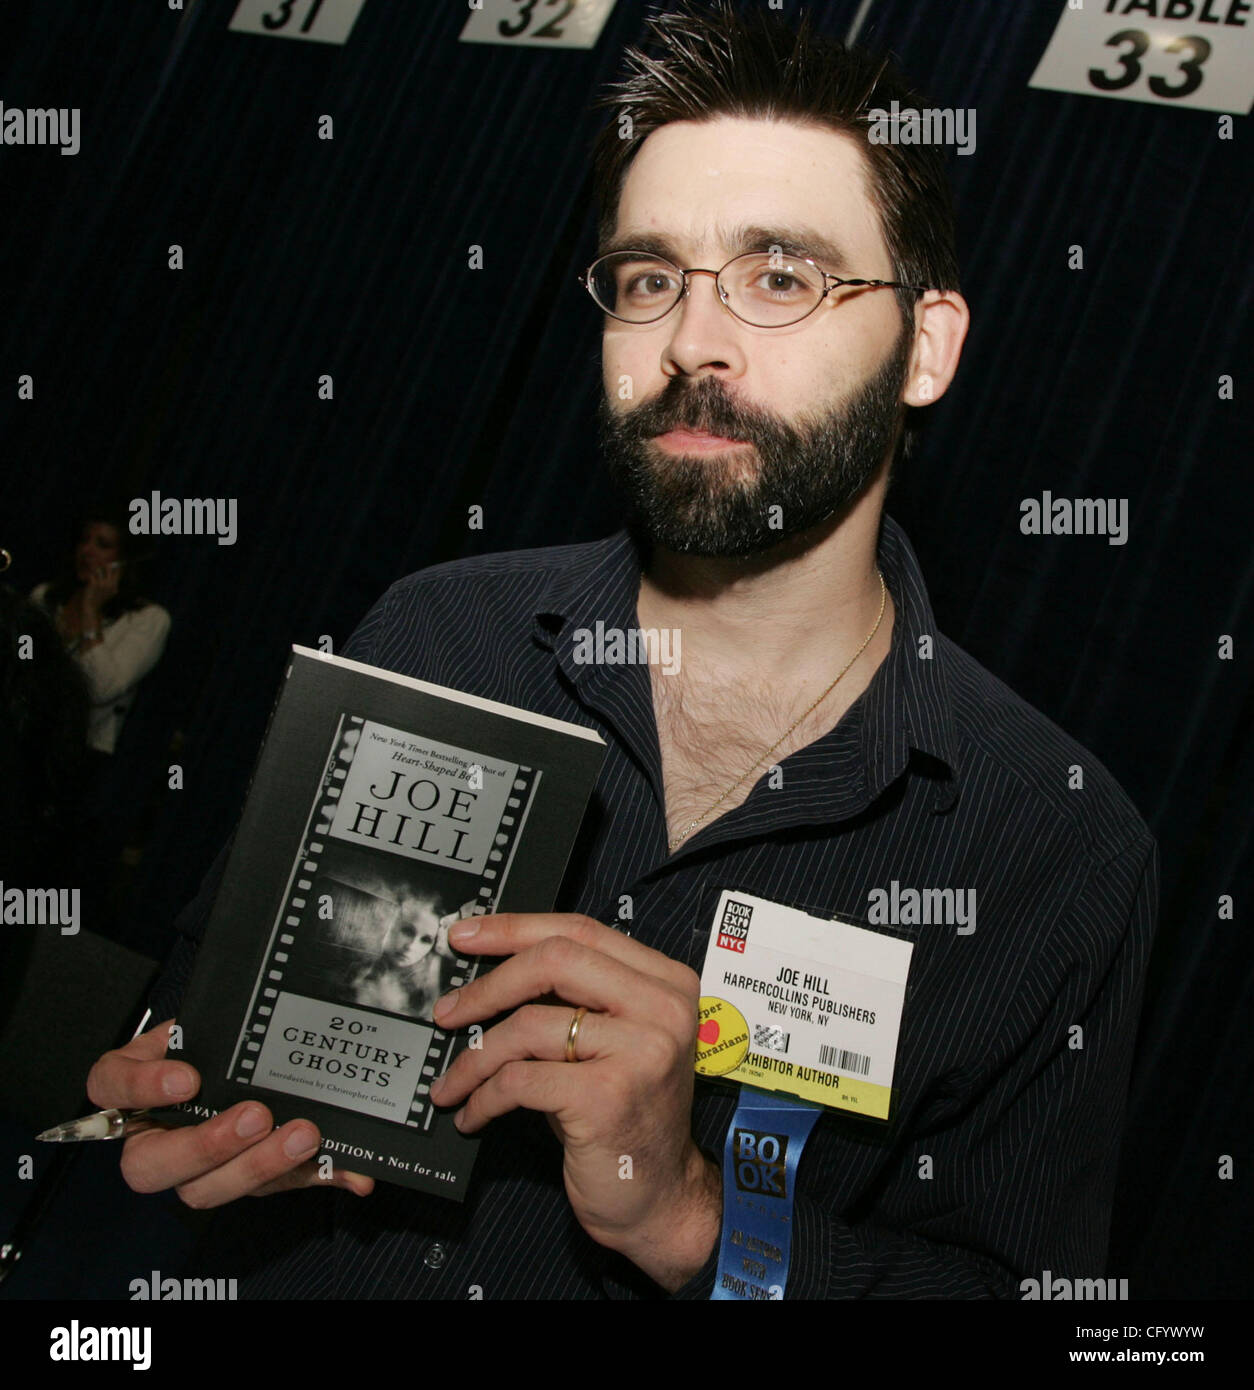 Jun 02, 2007 - New York, NY, USA - Author and Stephen King's son, JOE HILL promotes his new book '20th Century Ghosts' at the BookExpo America 2007 trade show held at the Jacob Javits Convention Center. (Credit Image: © Nancy Kaszerman/ZUMA Press) Stock Photo